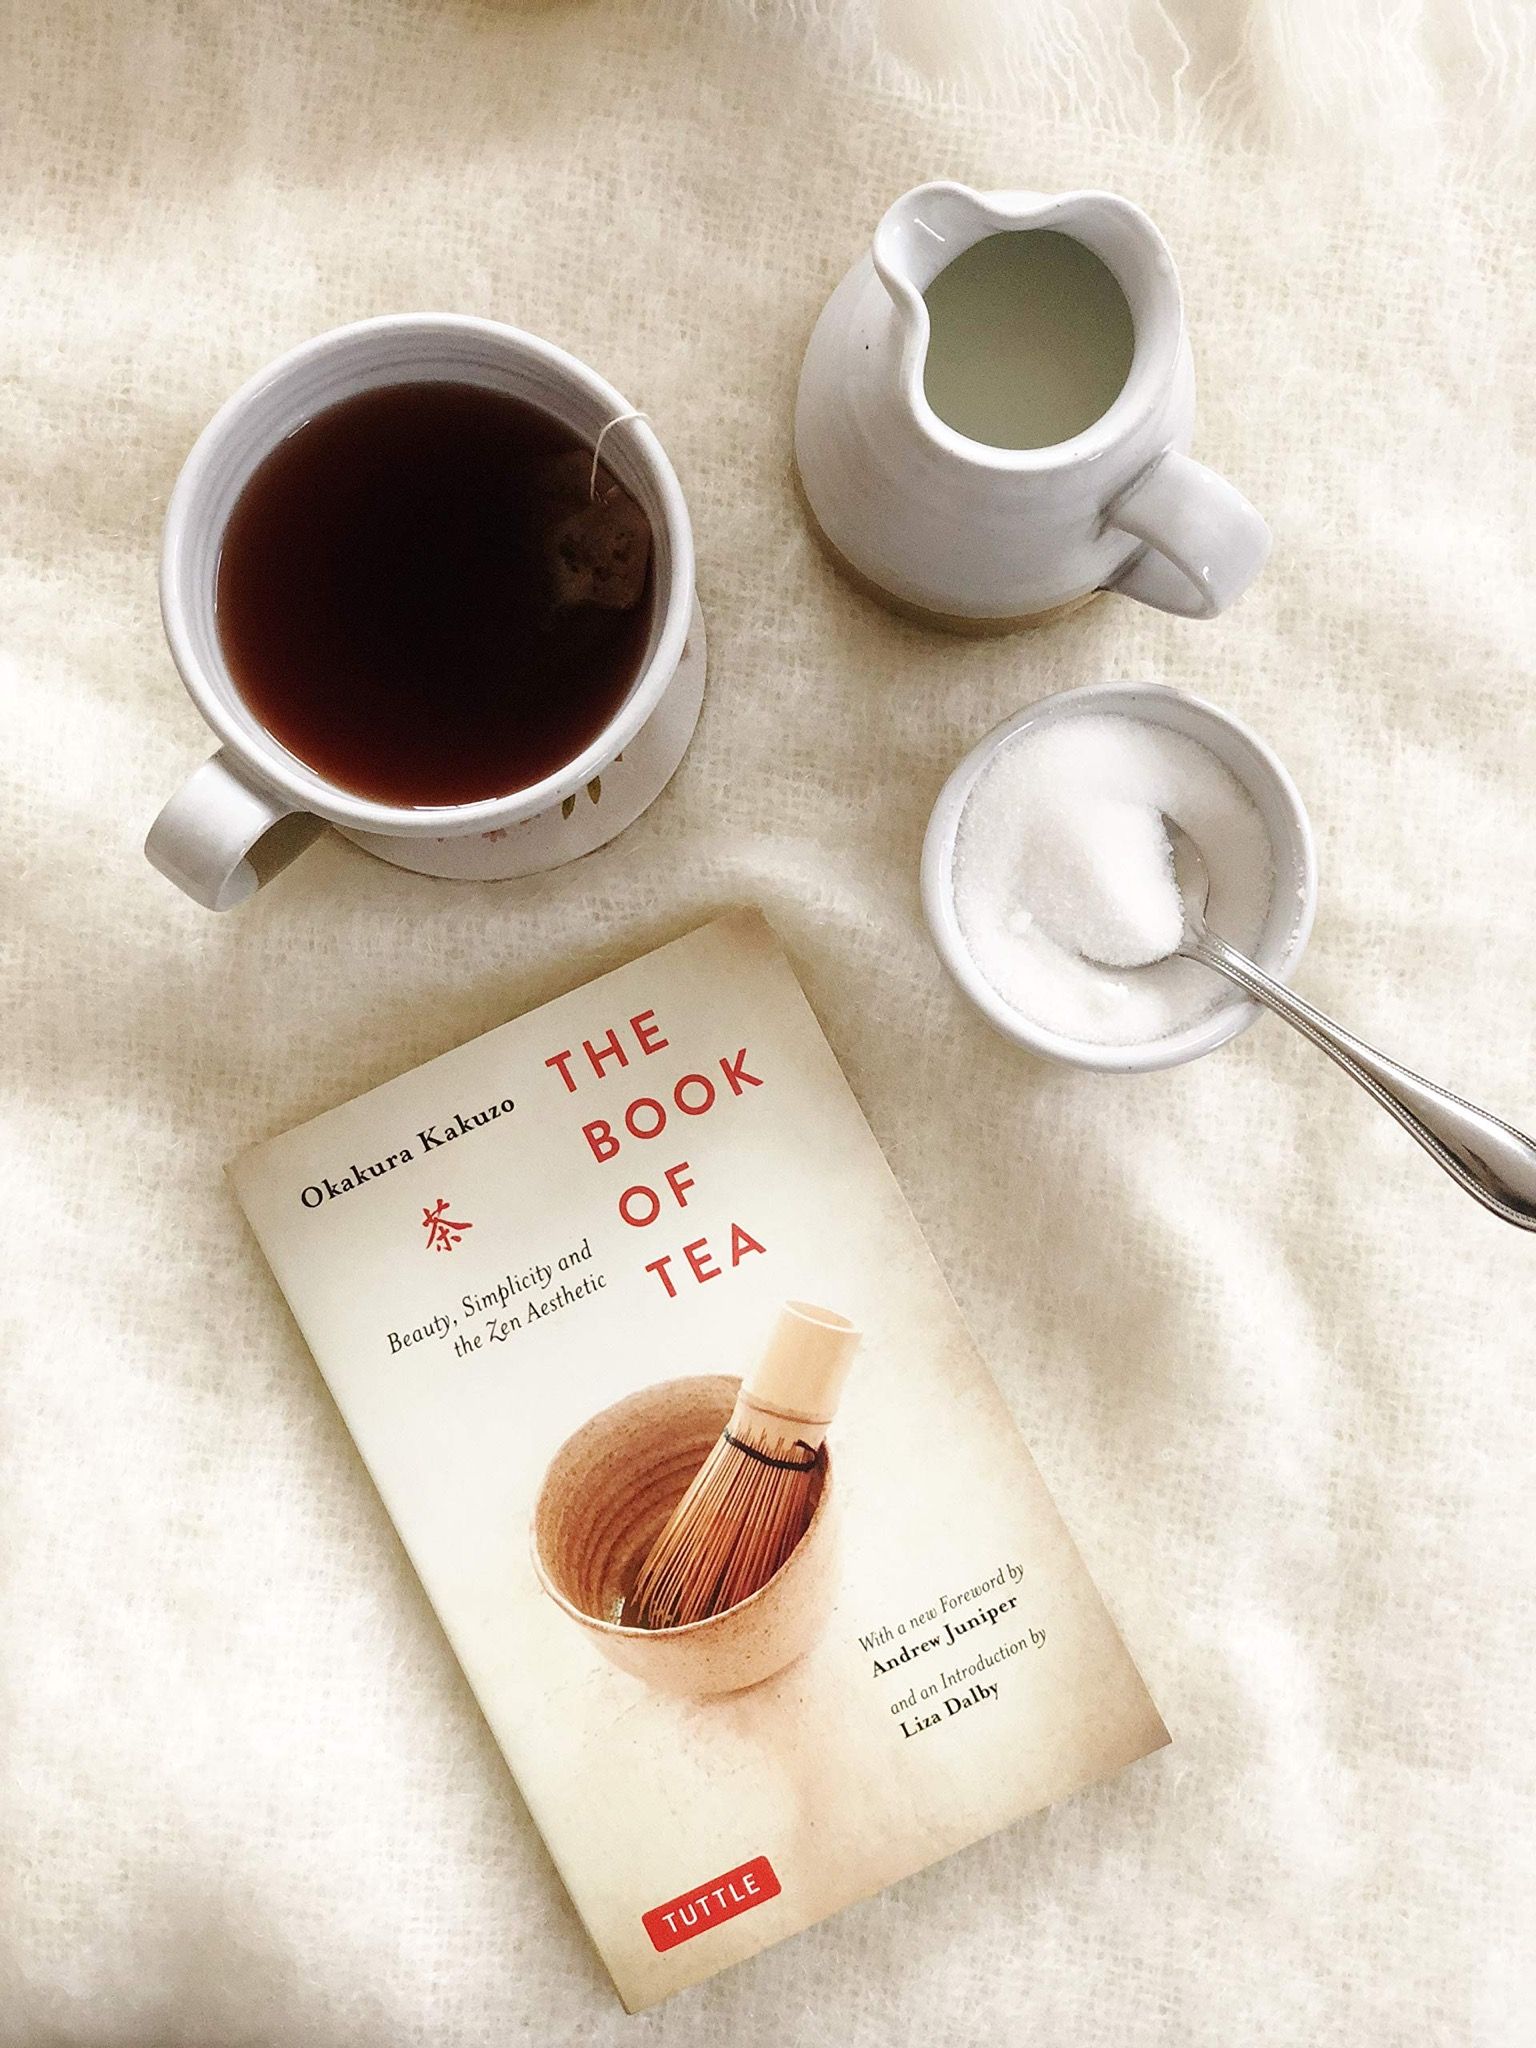  The Book of Tea: Beauty, Simplicity and the Zen Aesthetic 